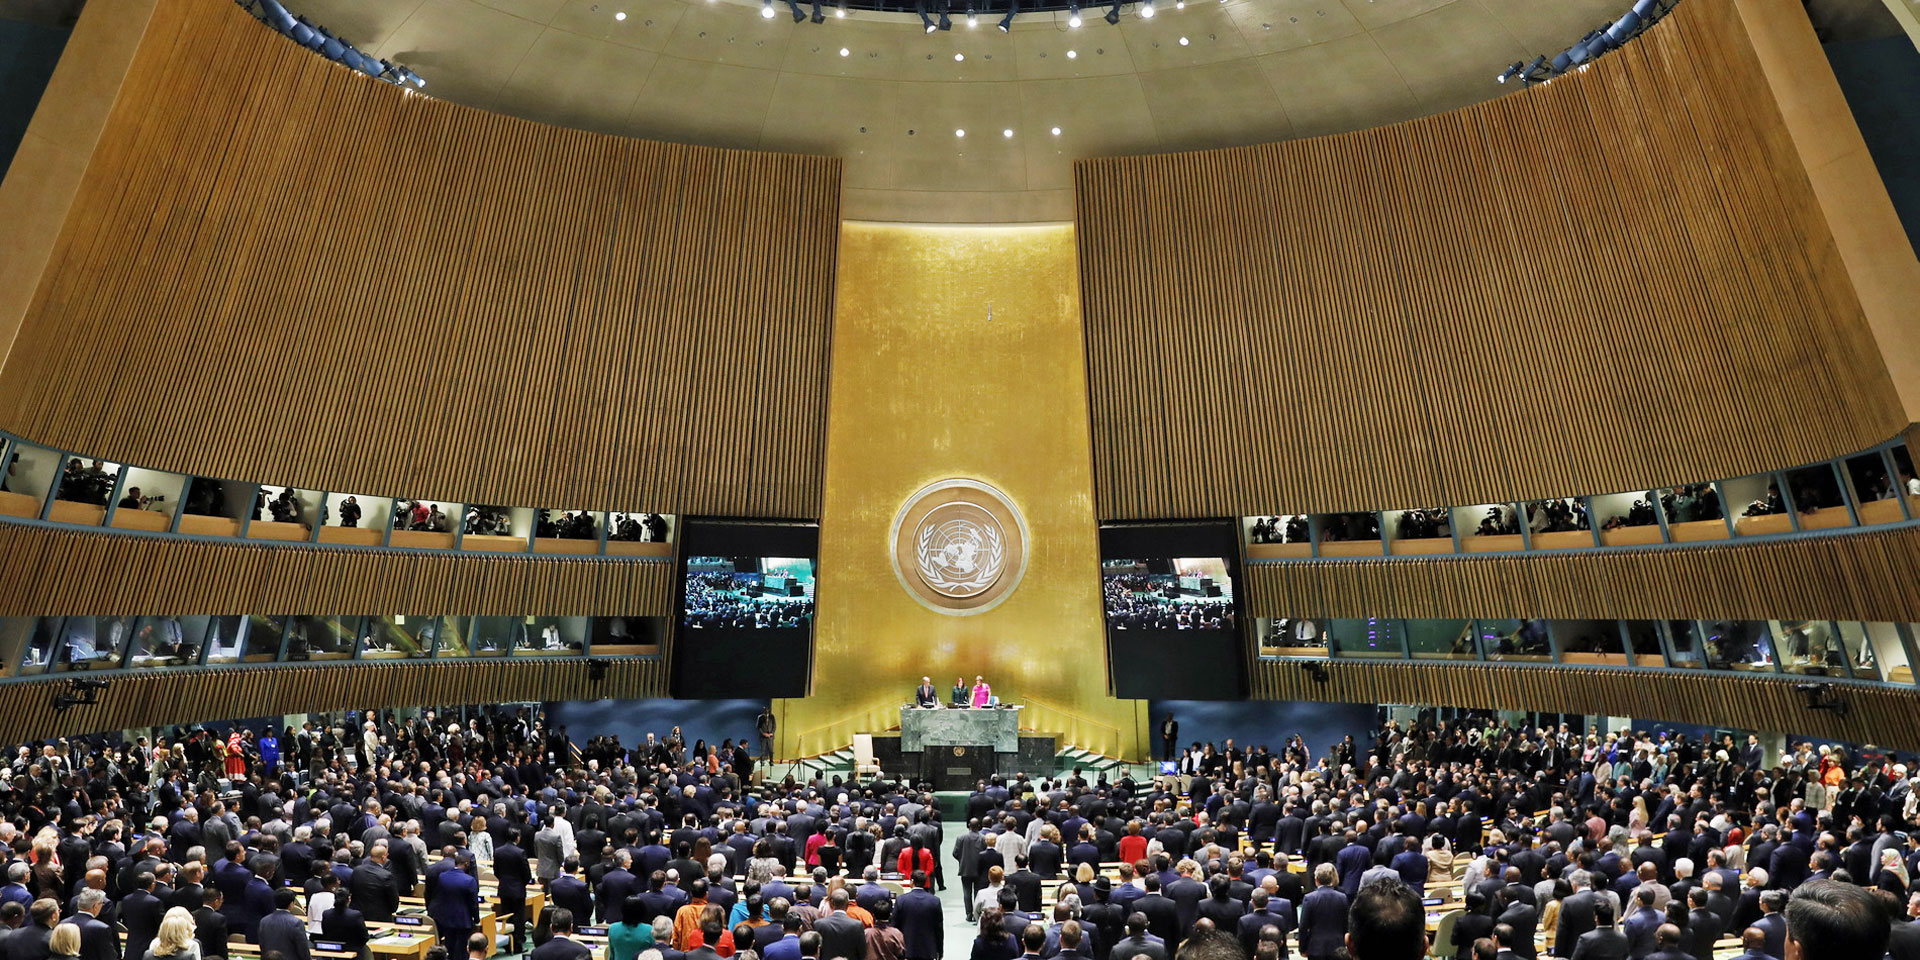 Image of the UN General Assembly hall with a large number of people inside.